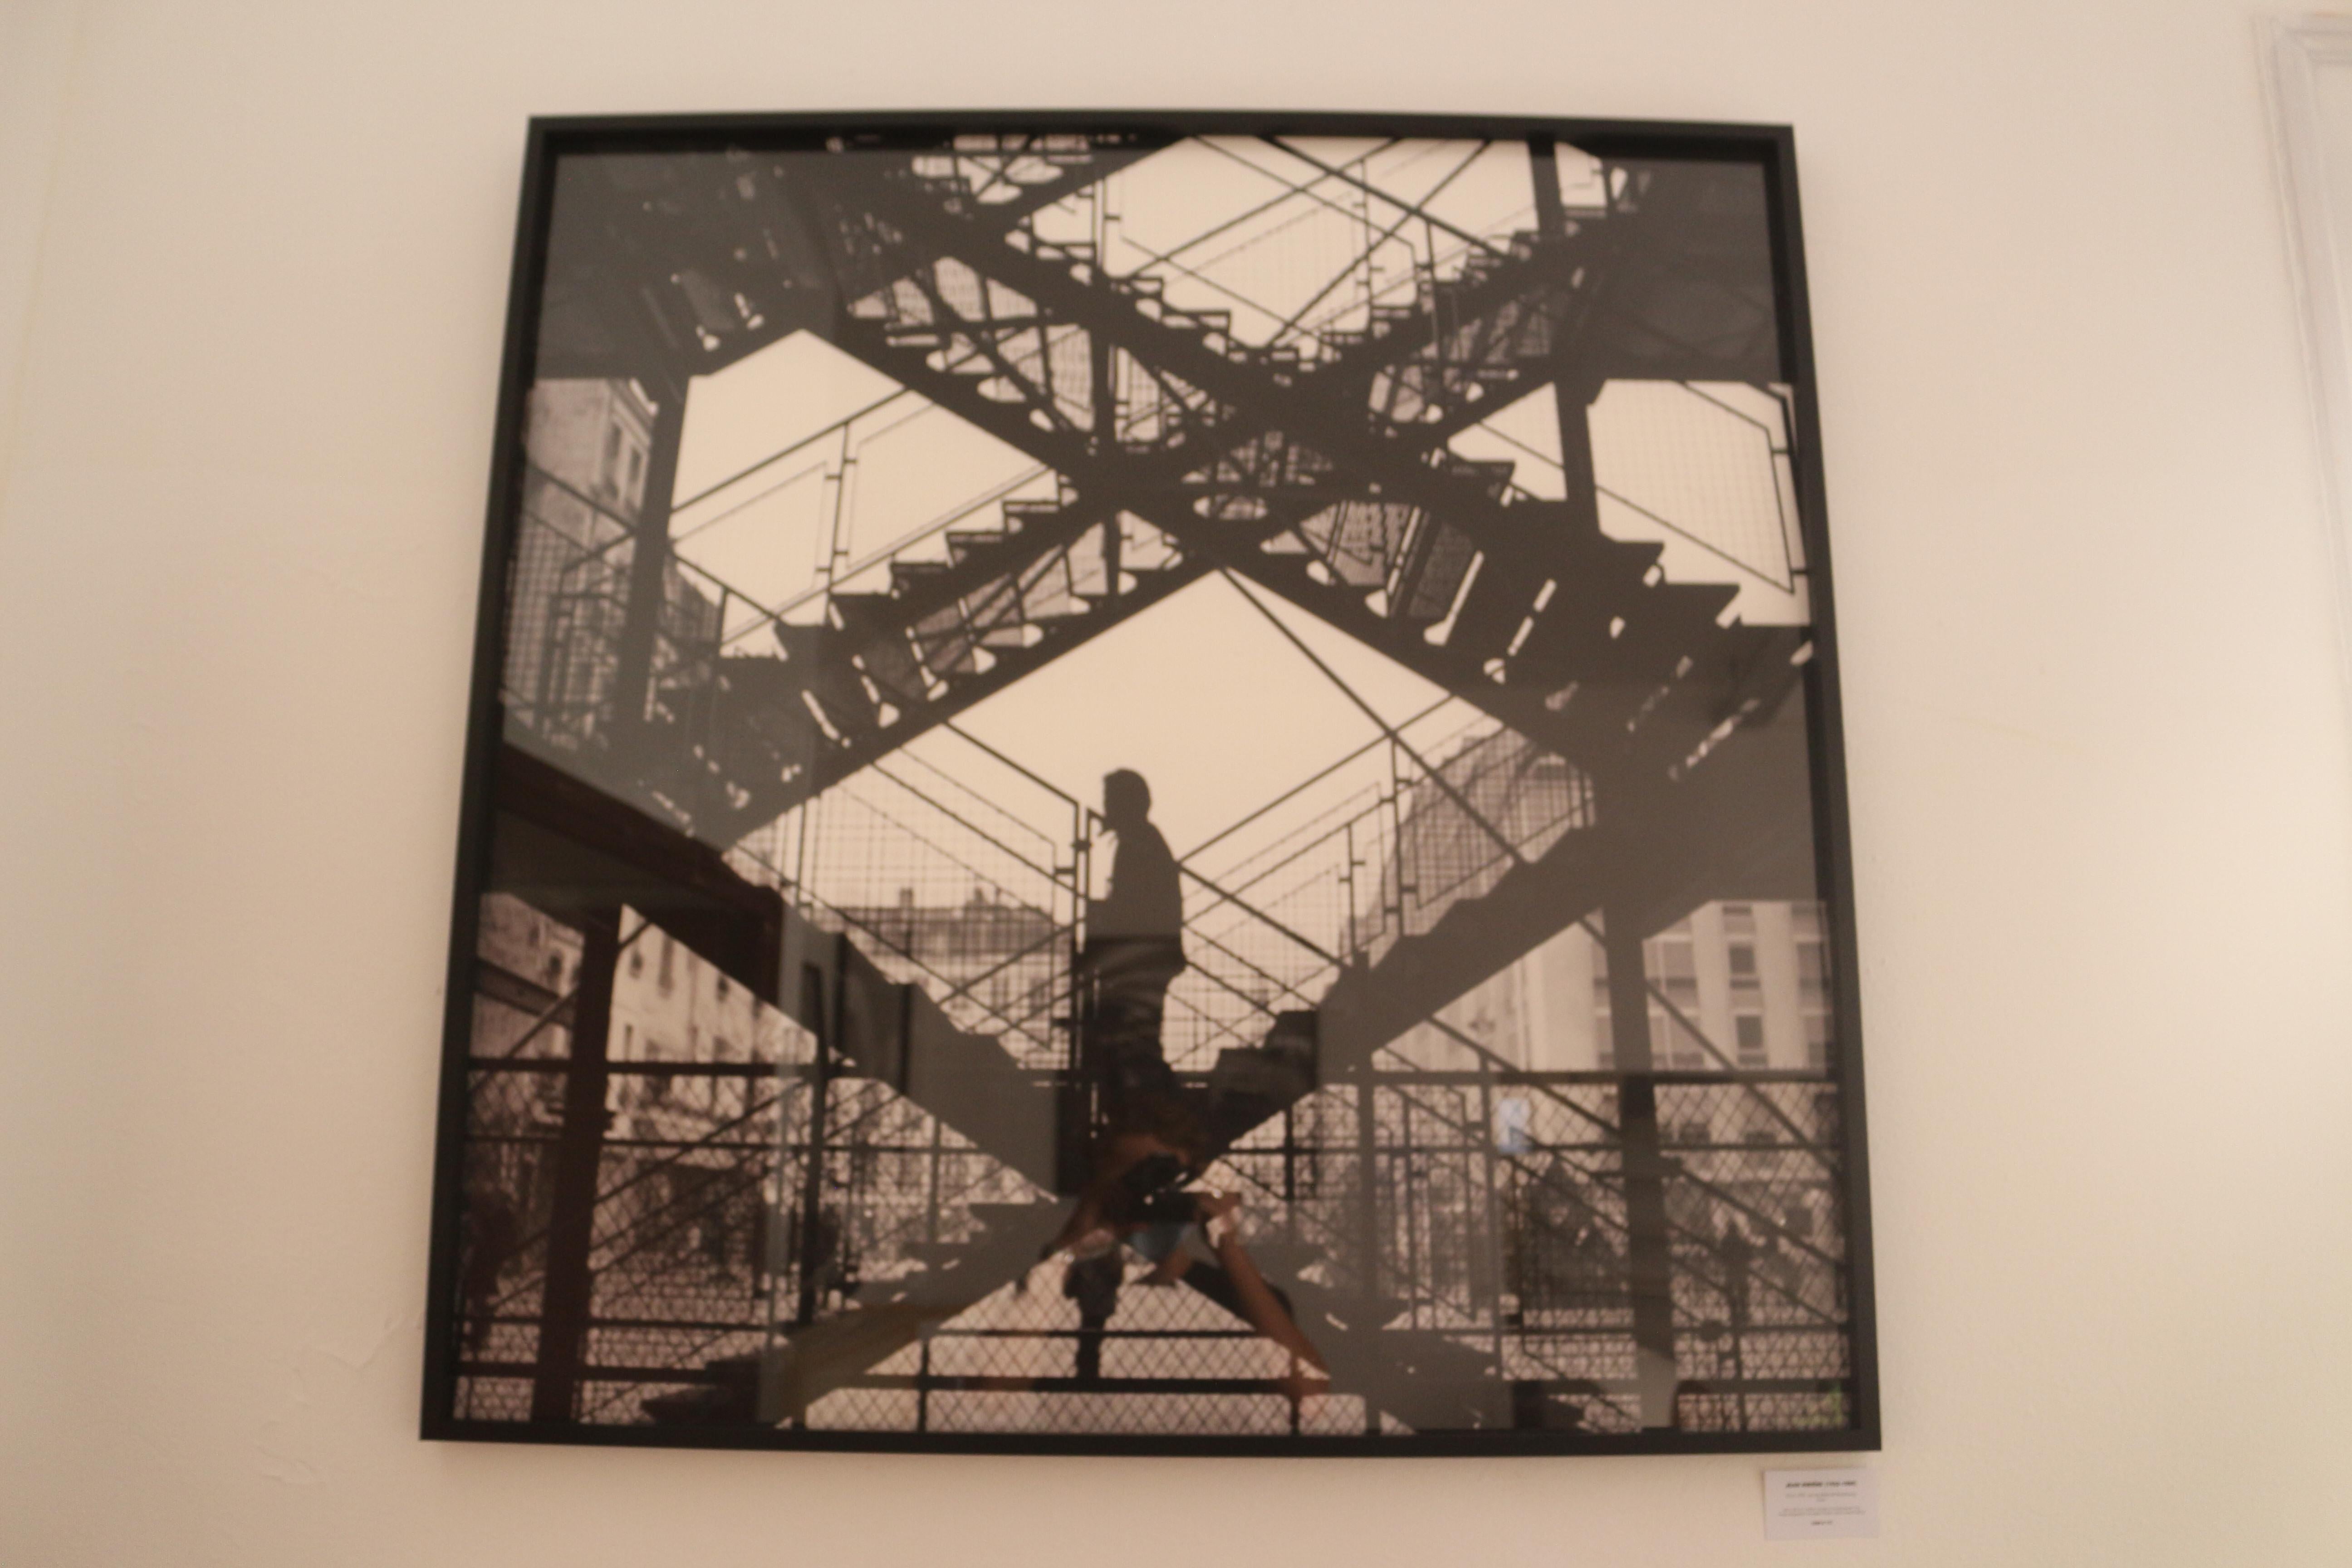 1970. The stairs of Beaubourg Paris 

100 x 100 cm / limited and numbered edition n°1/12
Digigraphy print on textured cotton fineart paper 320 gr. 

 Certification: Signed and numbered by hand.

 Frame: Black wood 
Colour: Black & White